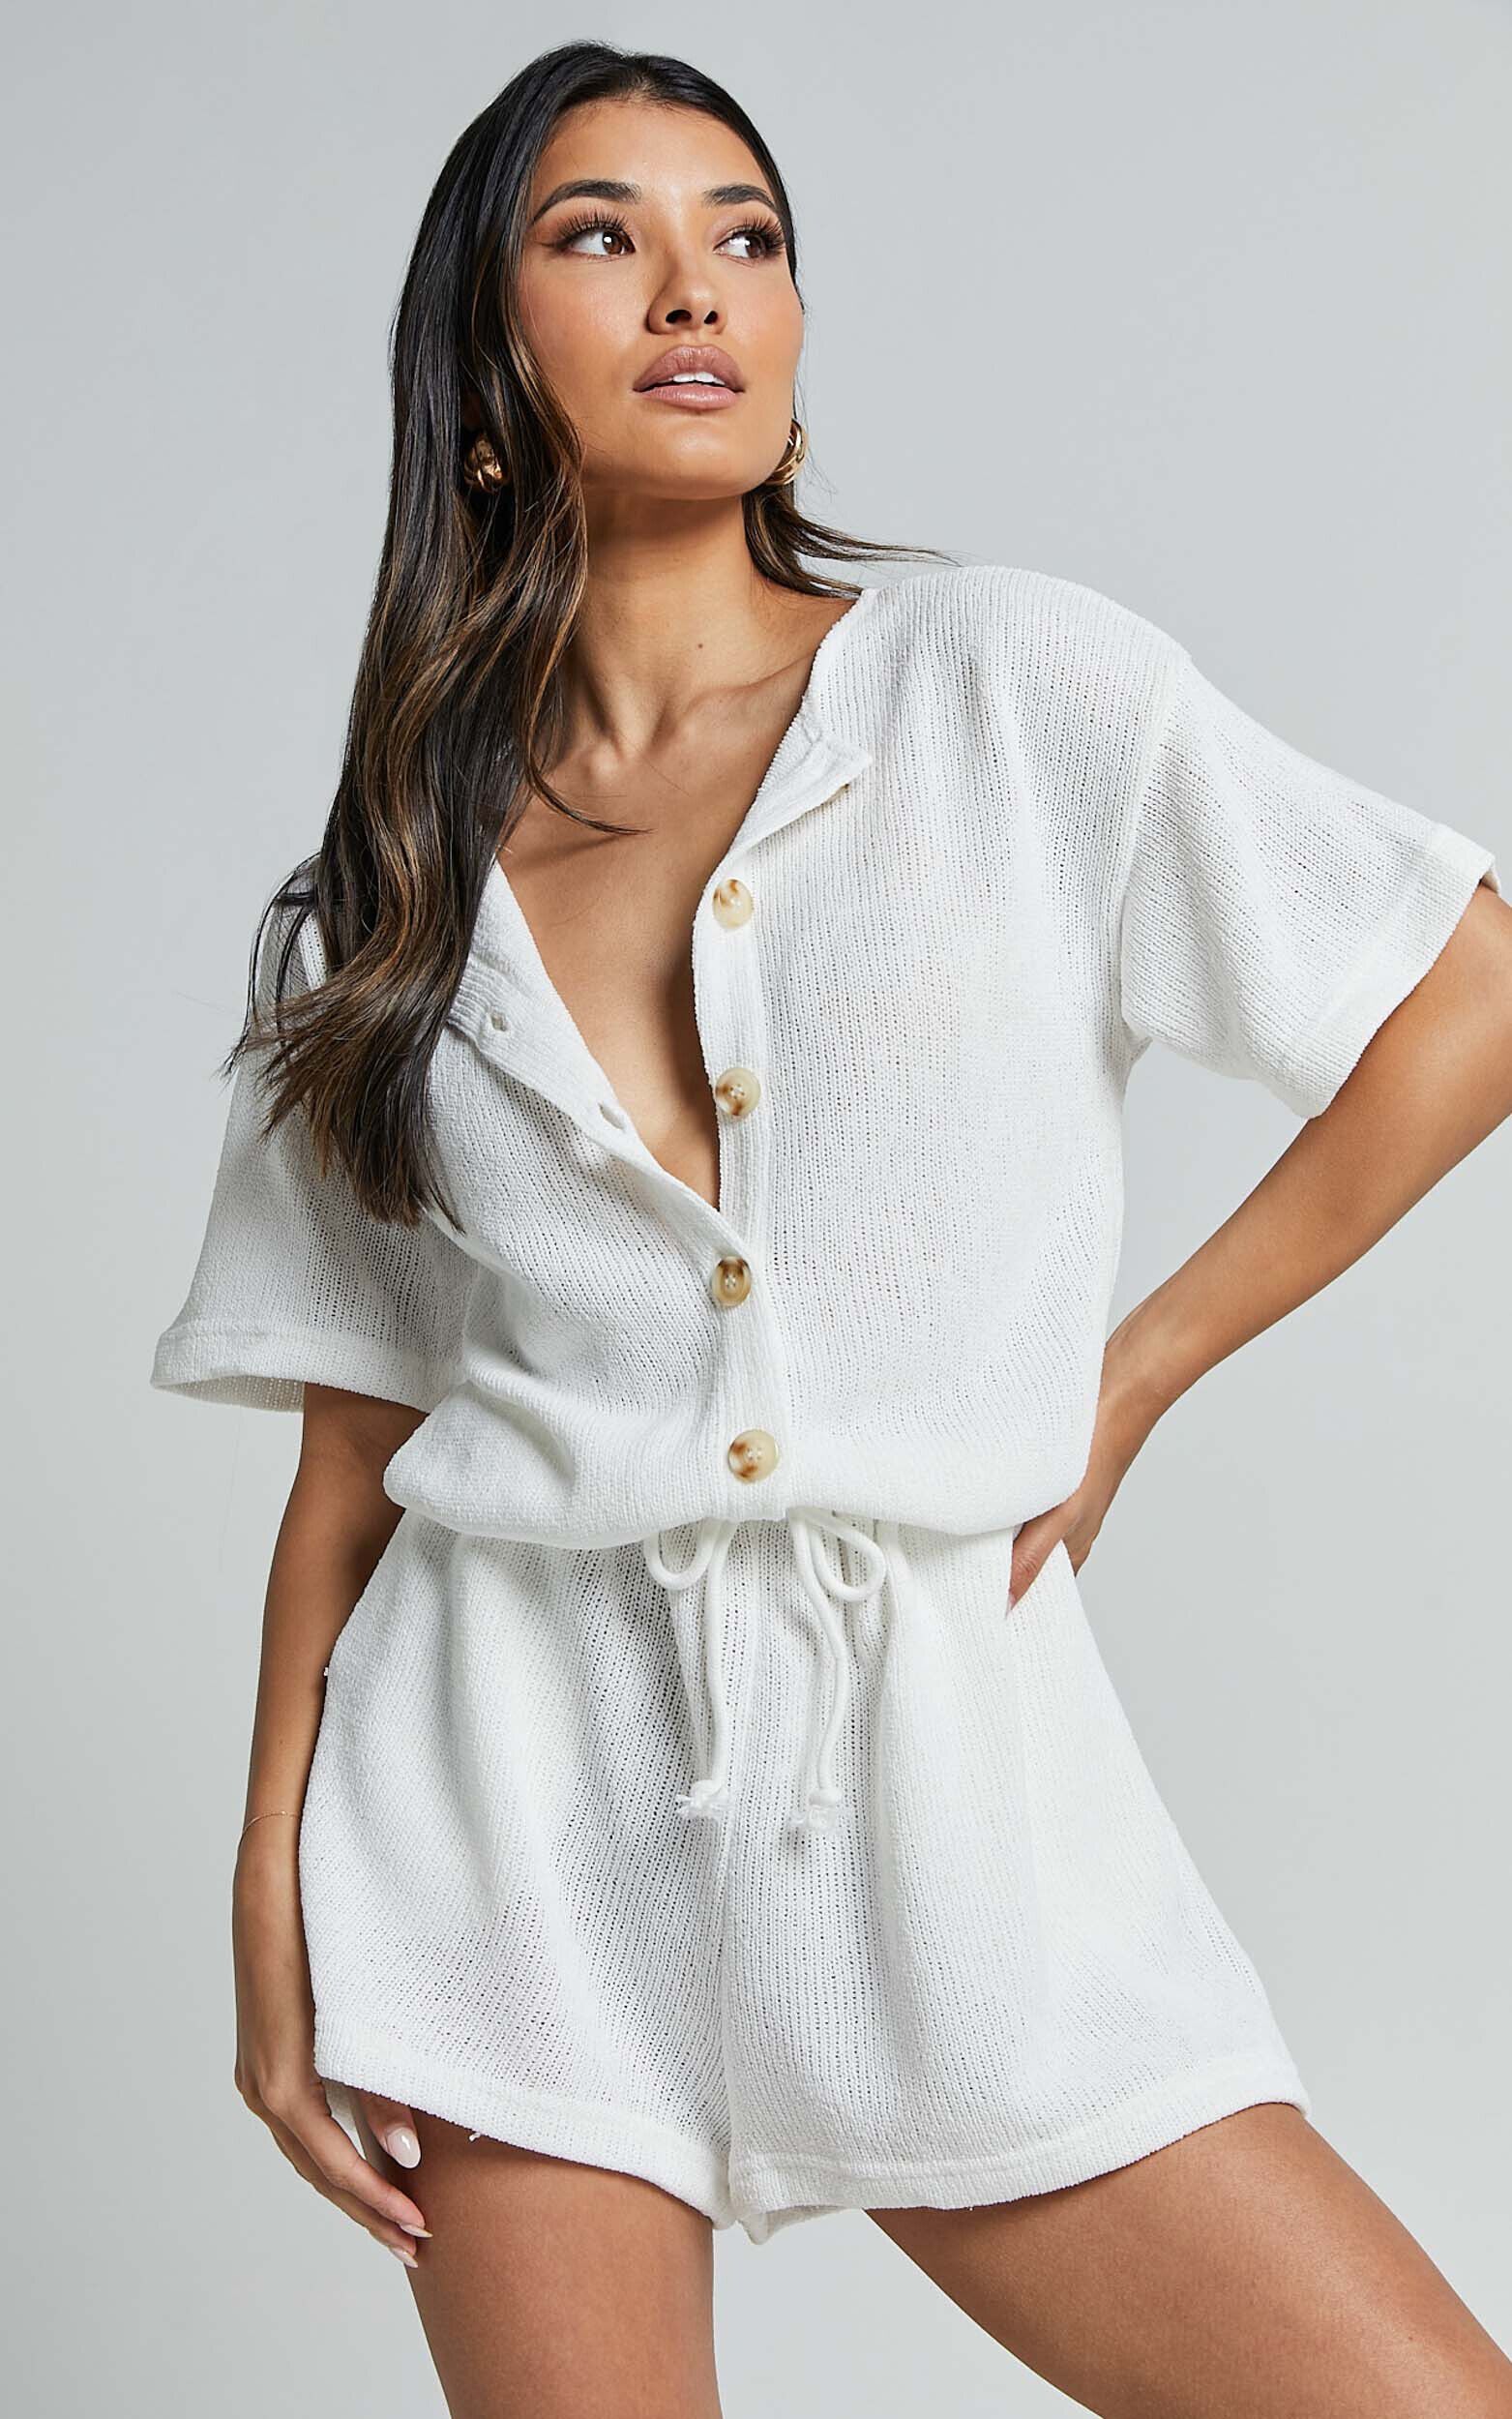 Edeline Playsuit - Button Front Short Sleeve Drawstring Waist in Off White - 06, WHT1